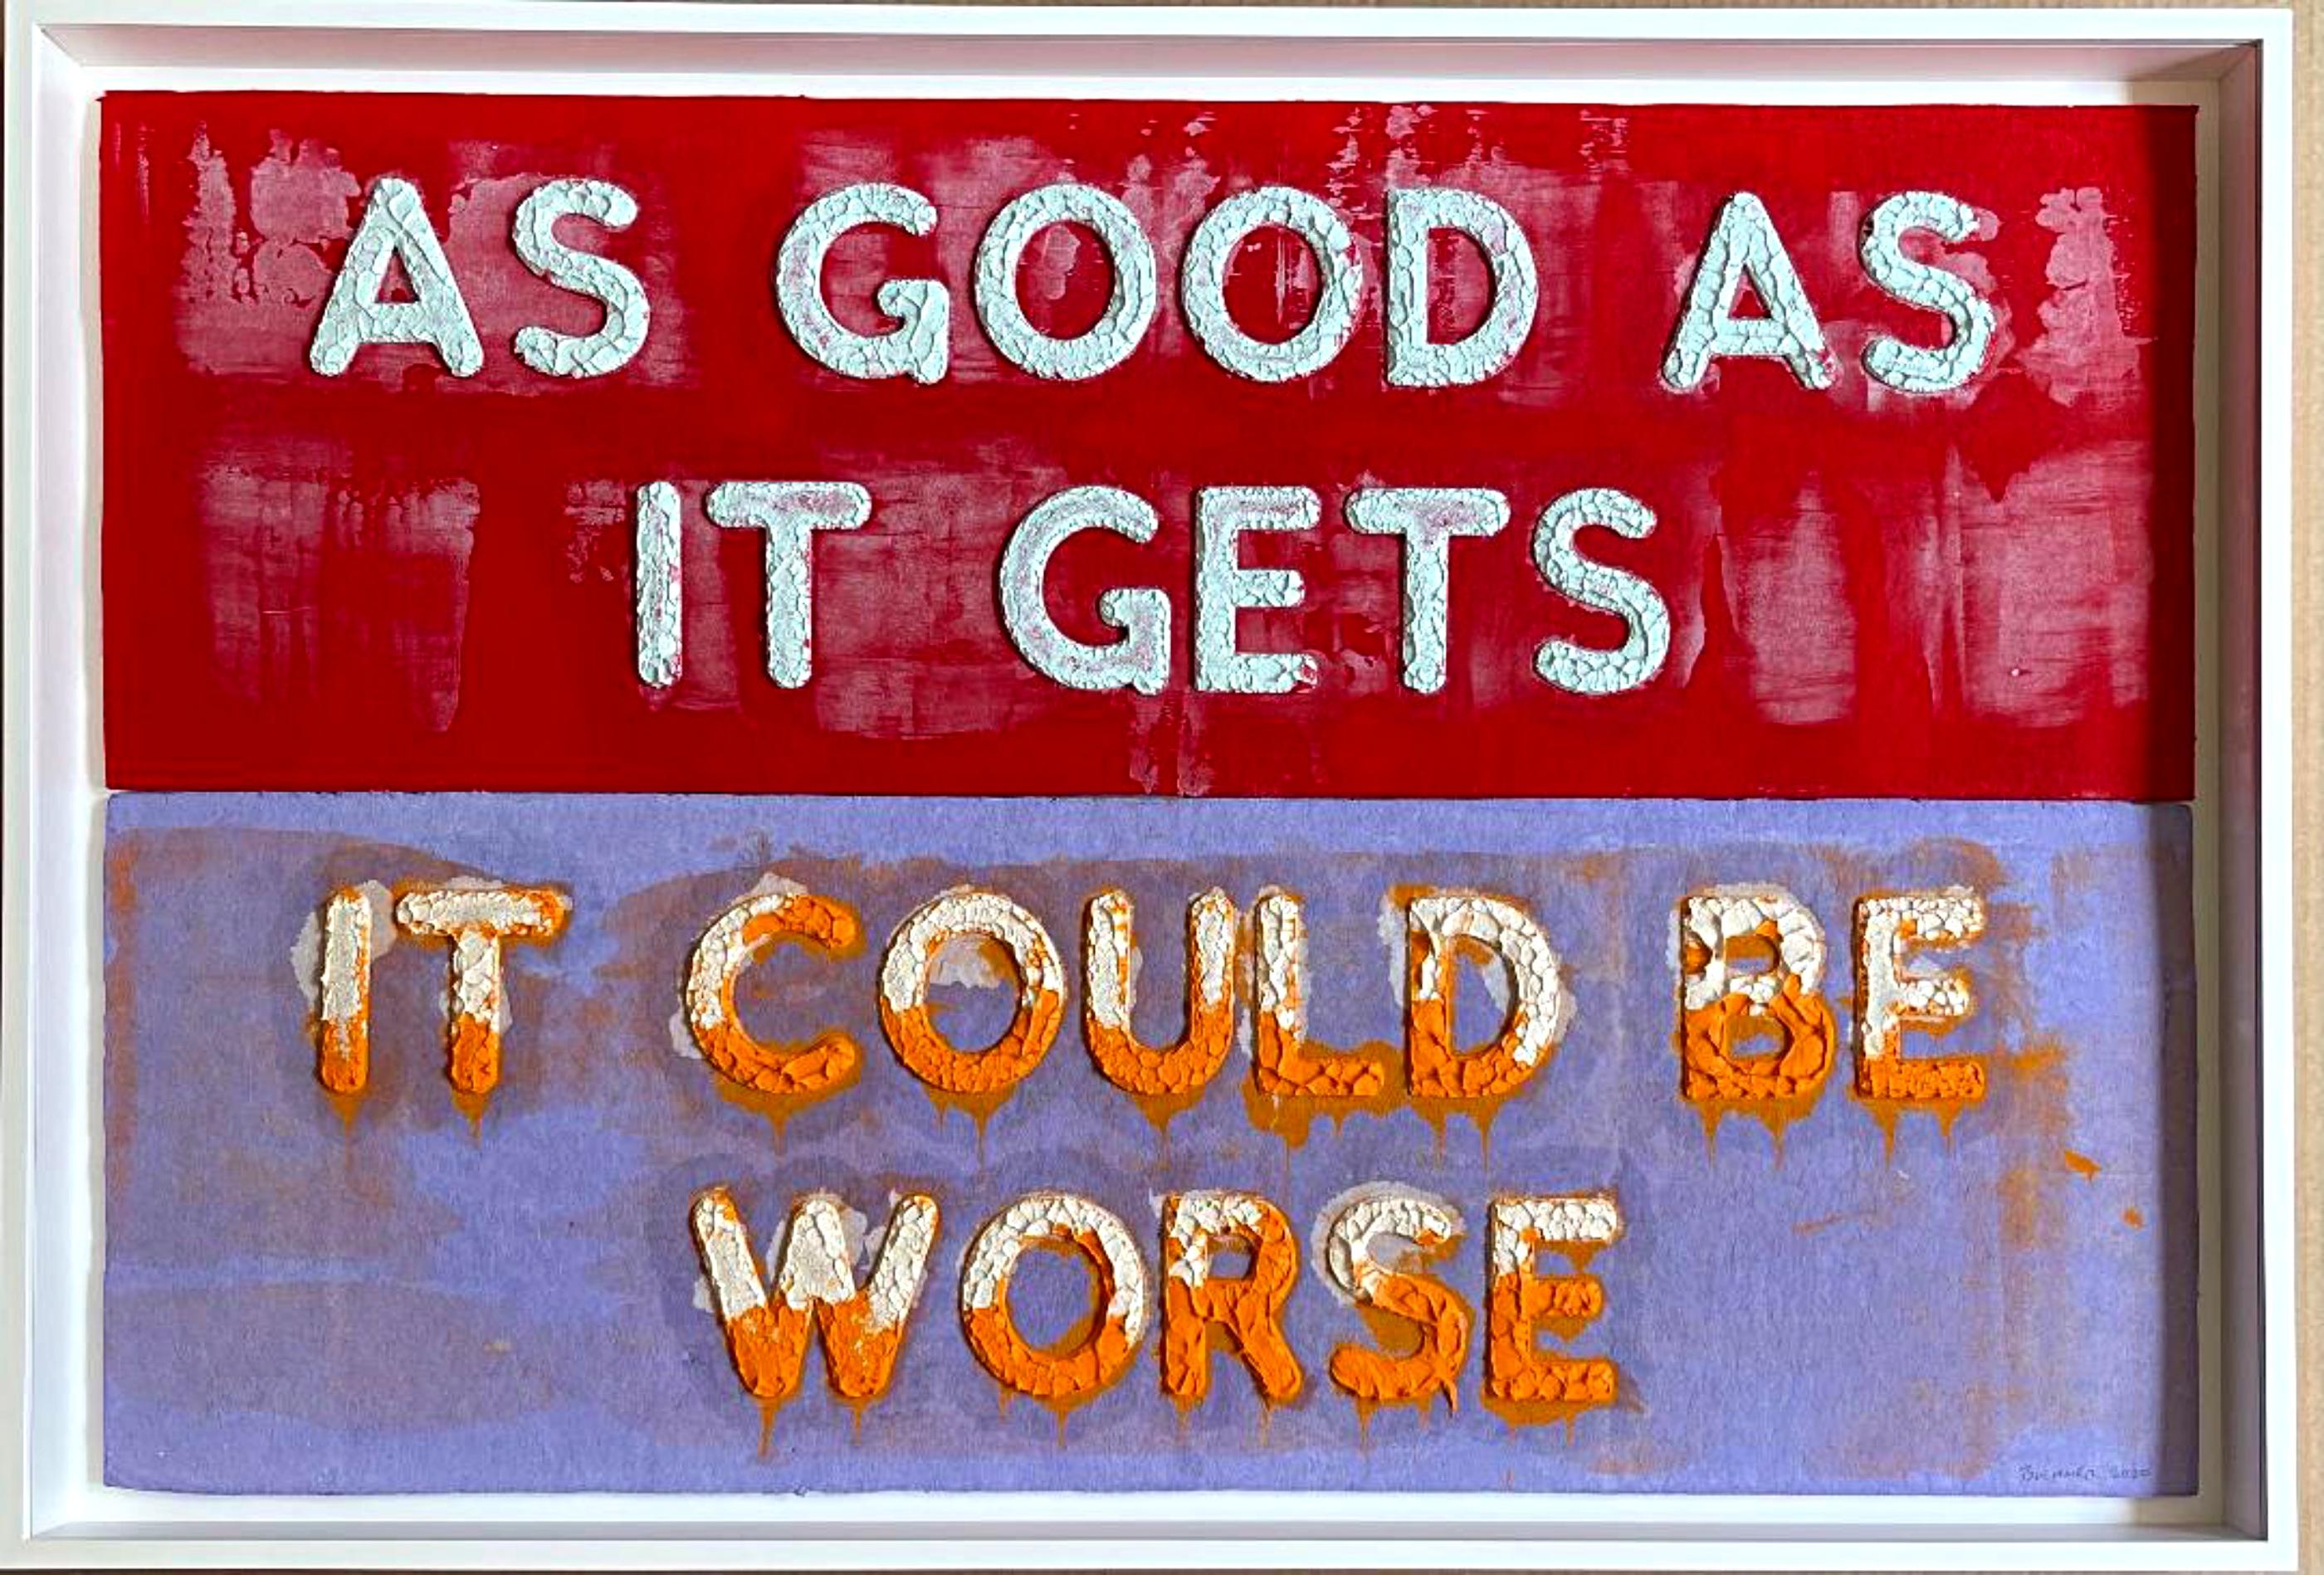 As Good As It Gets / It Could Be Worse - Mixed Media Art by Mel Bochner